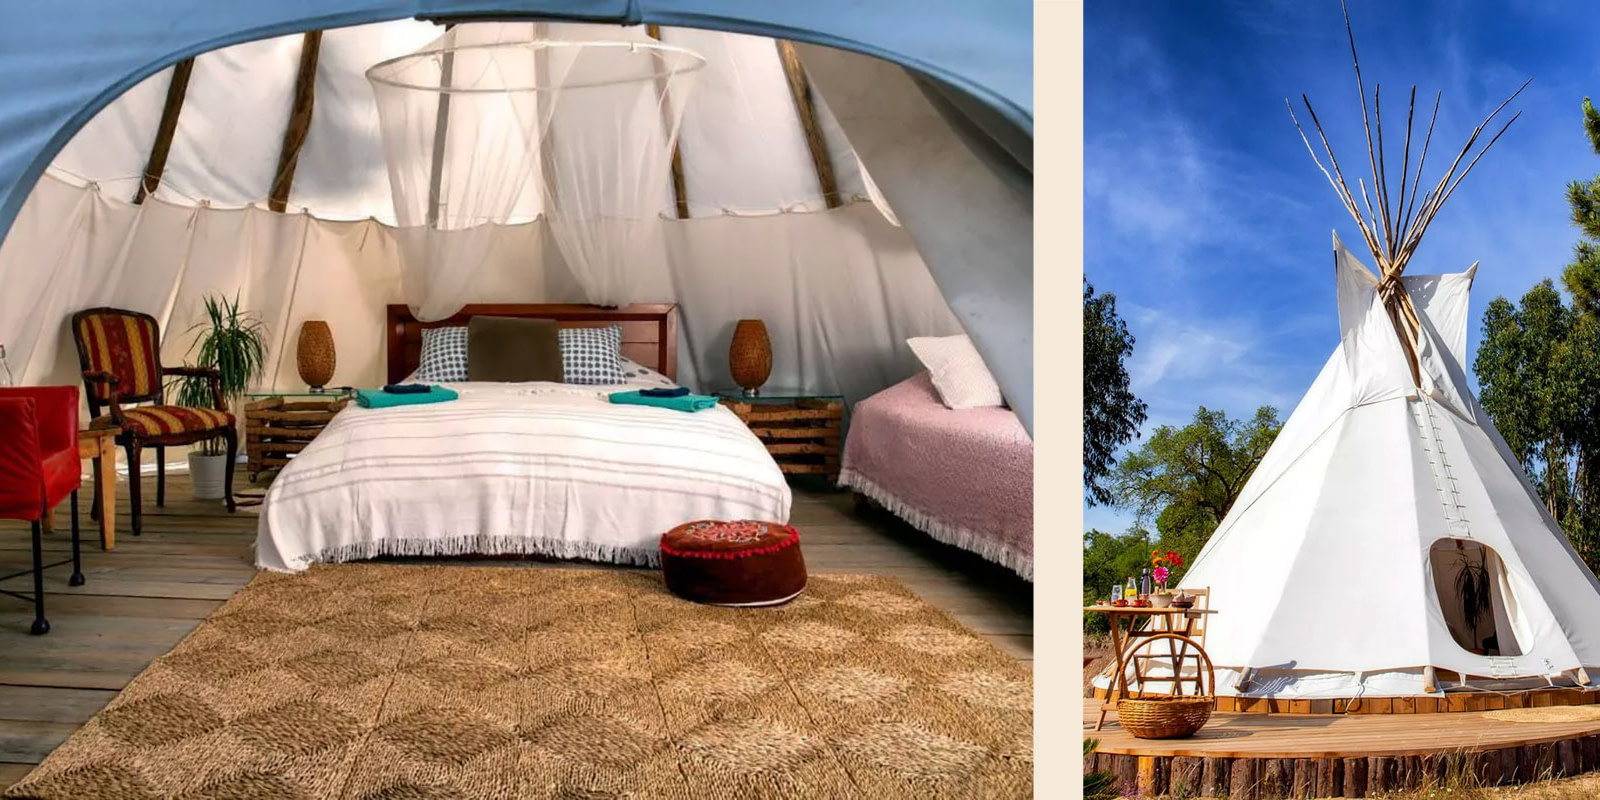 Book this romantic teepee in Portugal on Campanyon